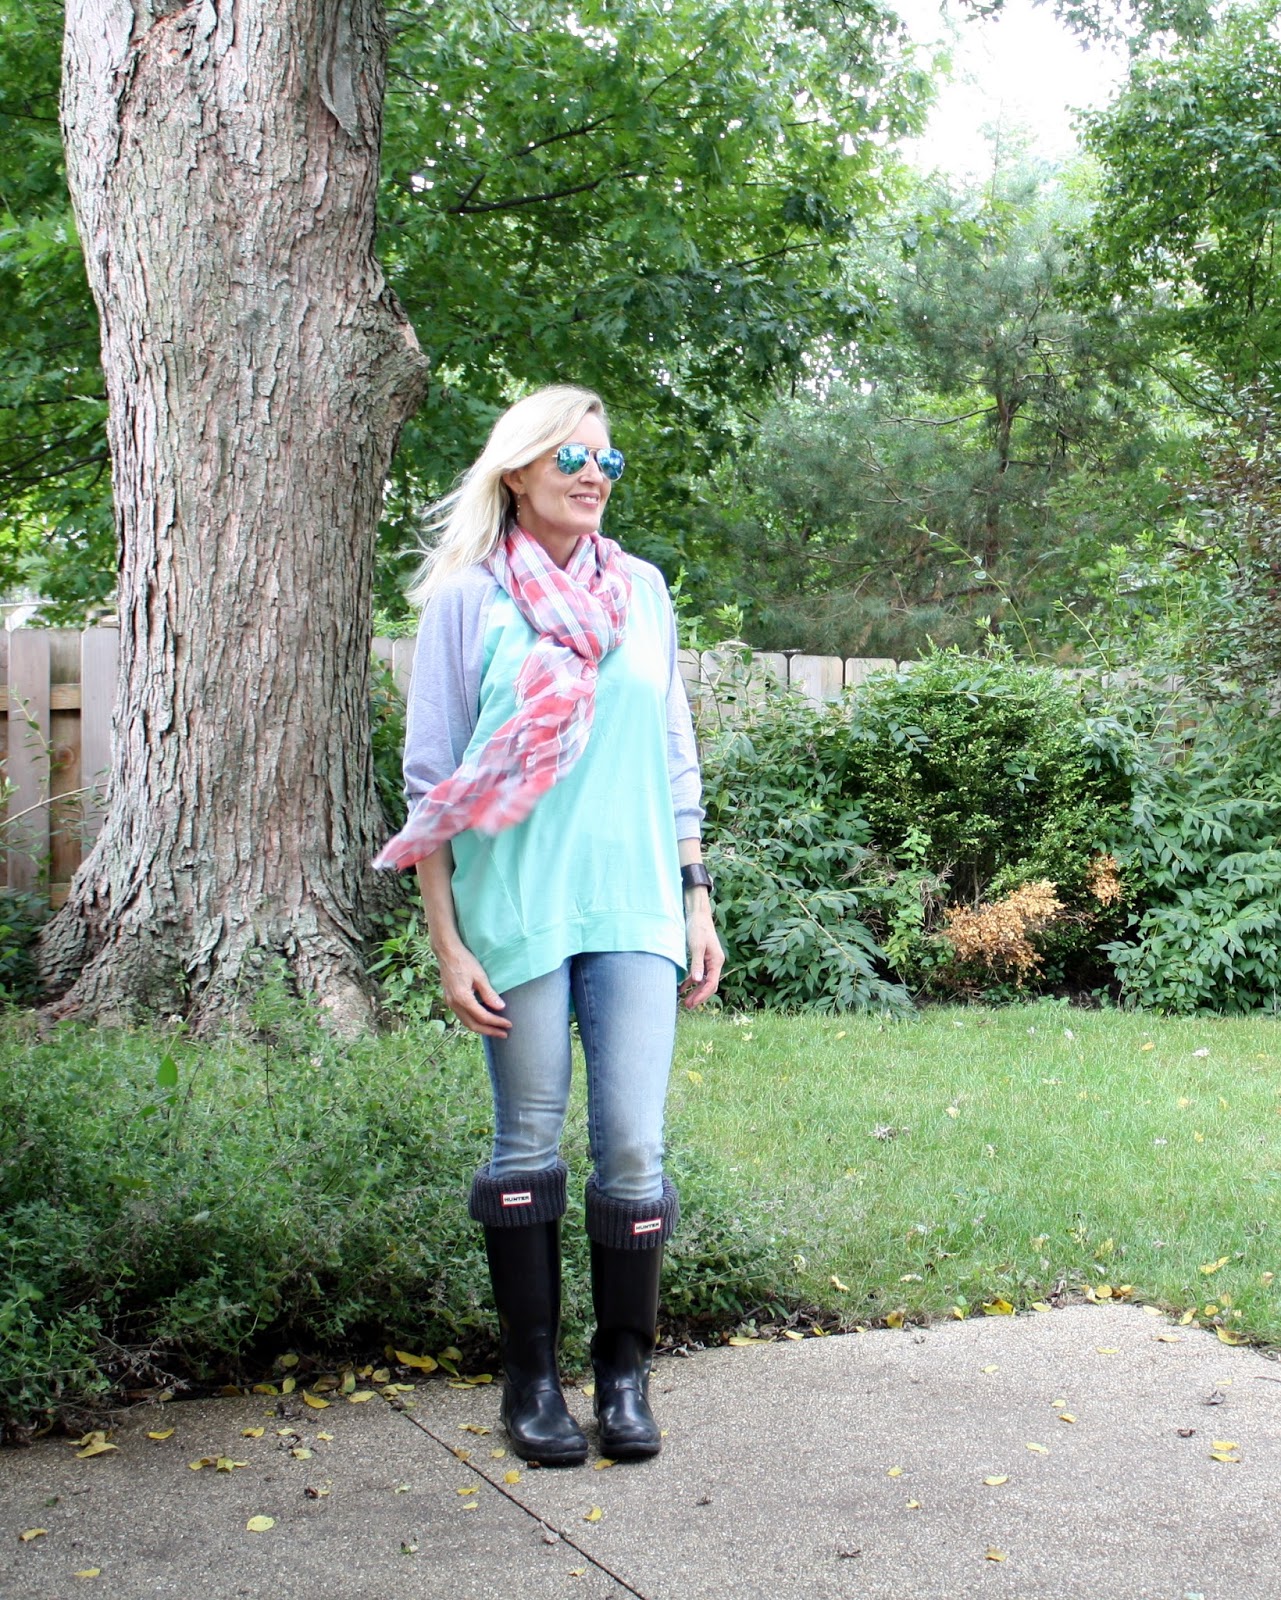 dress up a tunic with a scarf